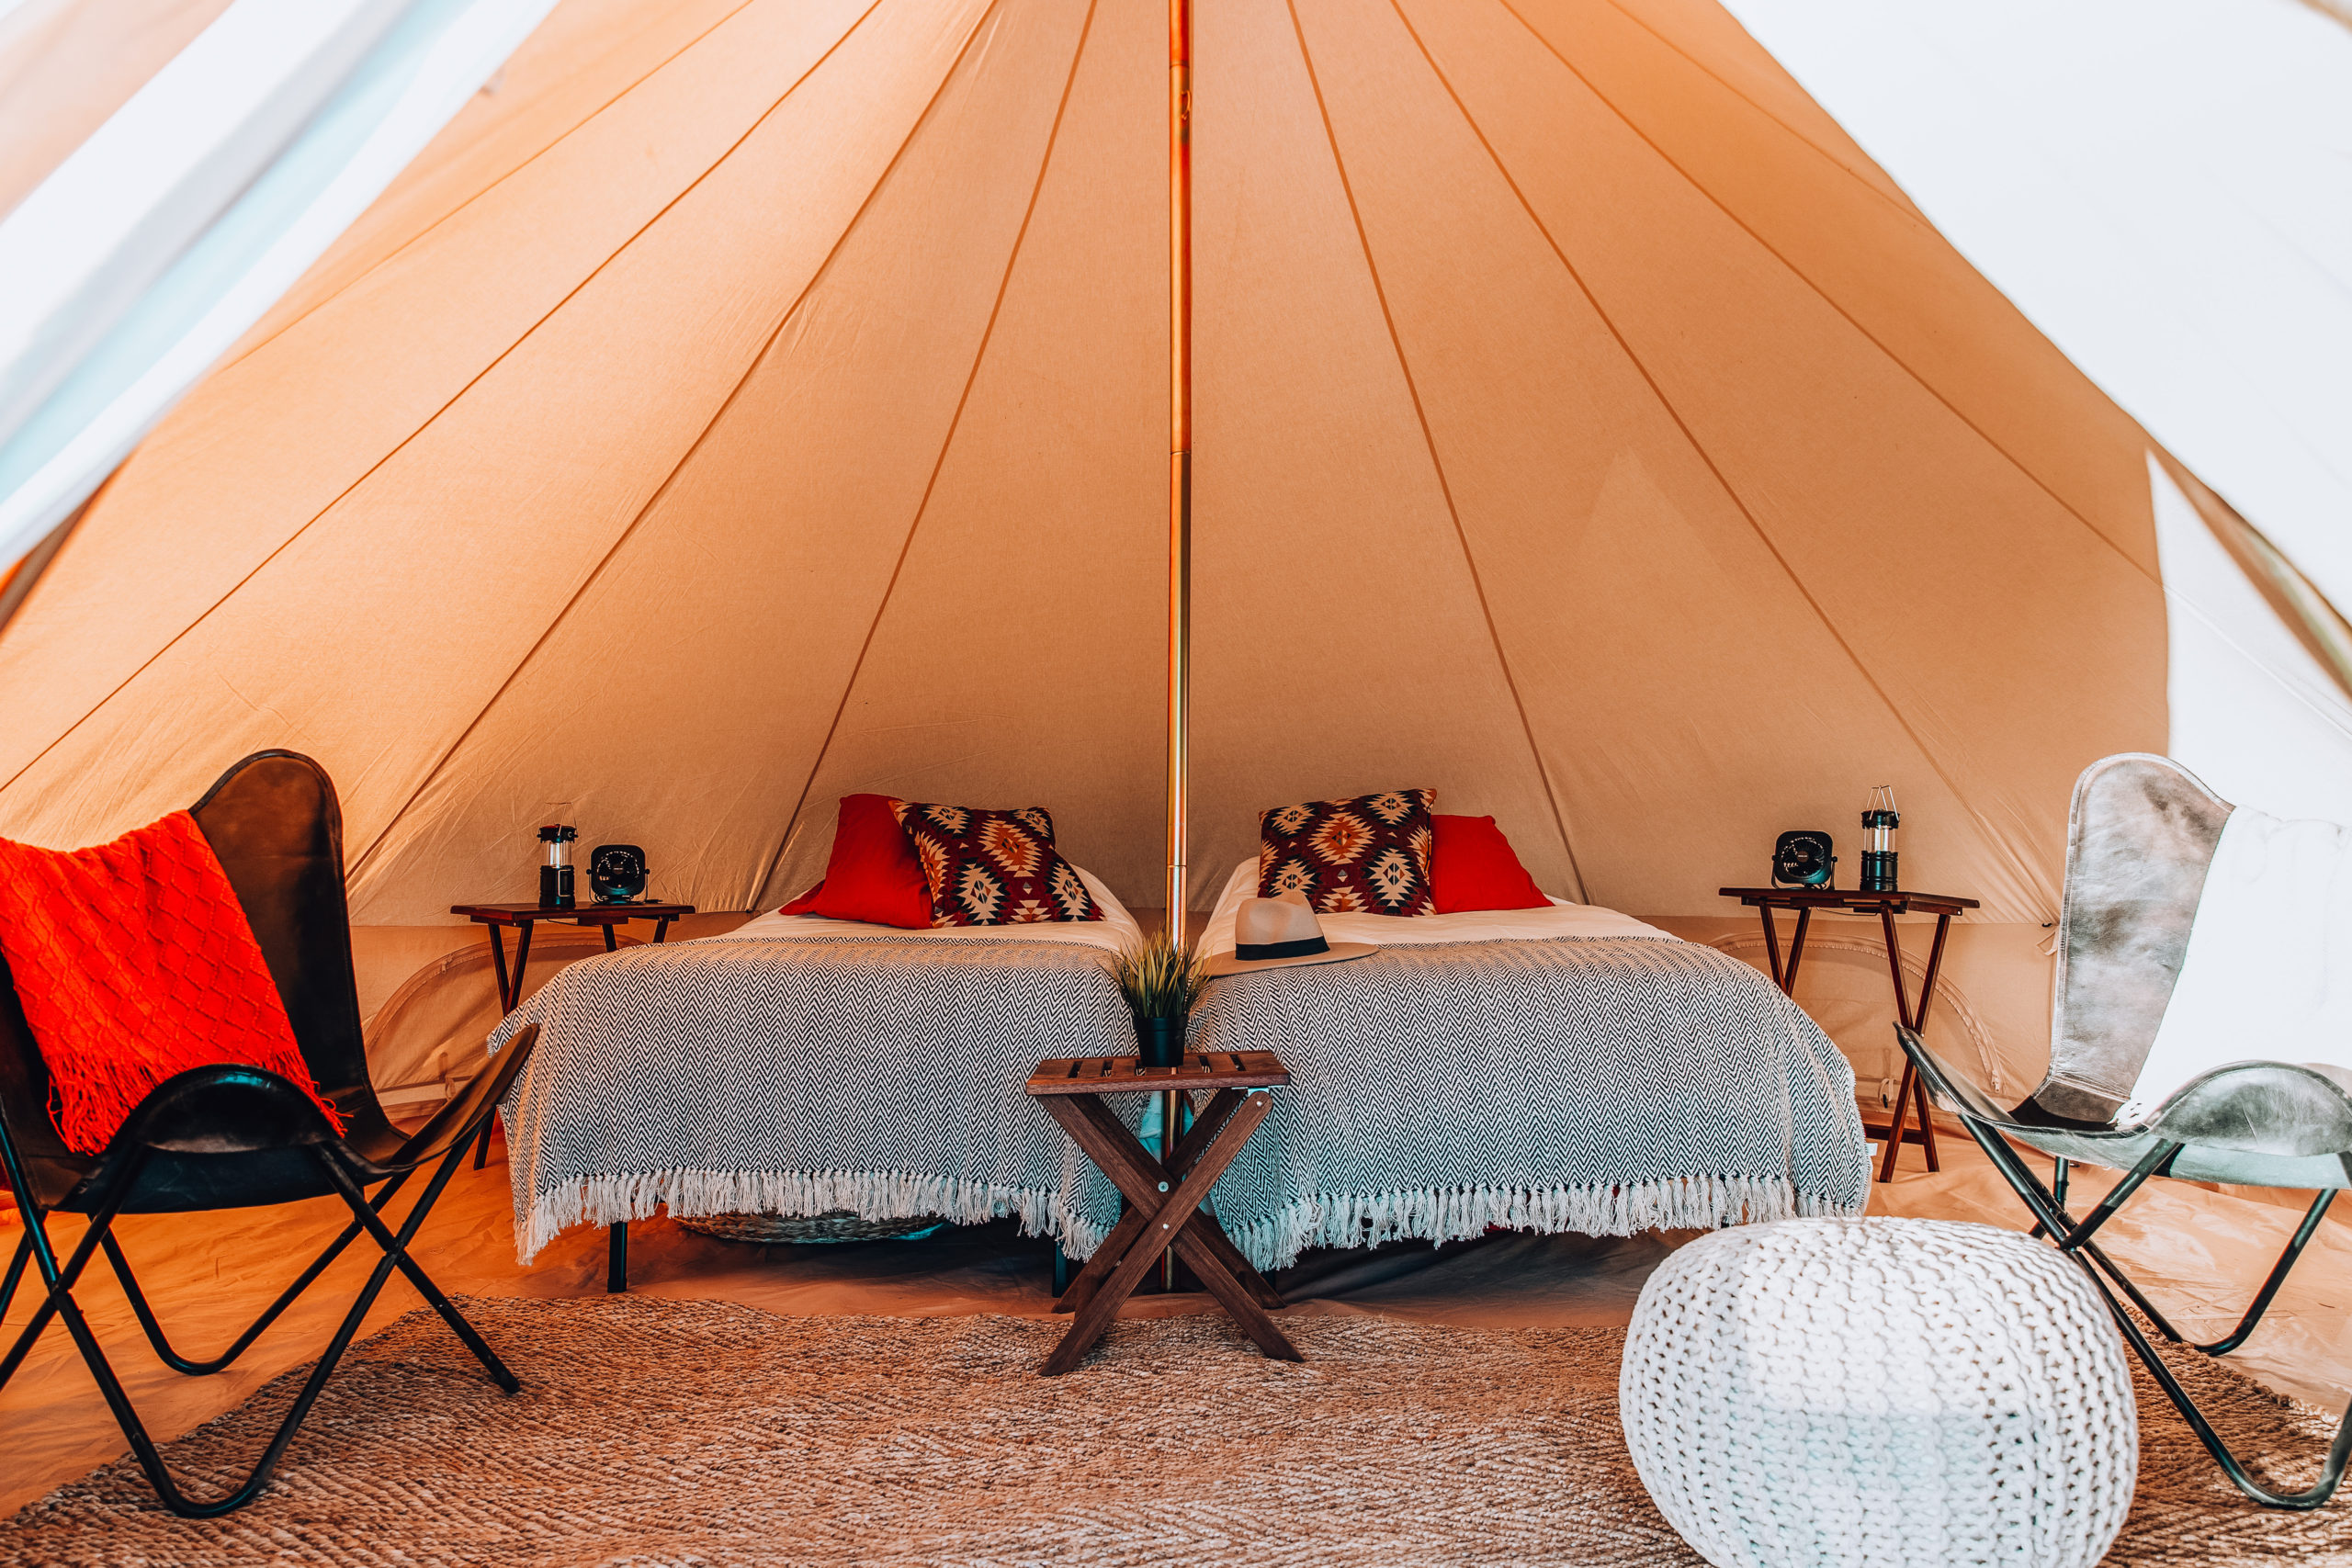 Glamping – The Glamorous World of Camping!